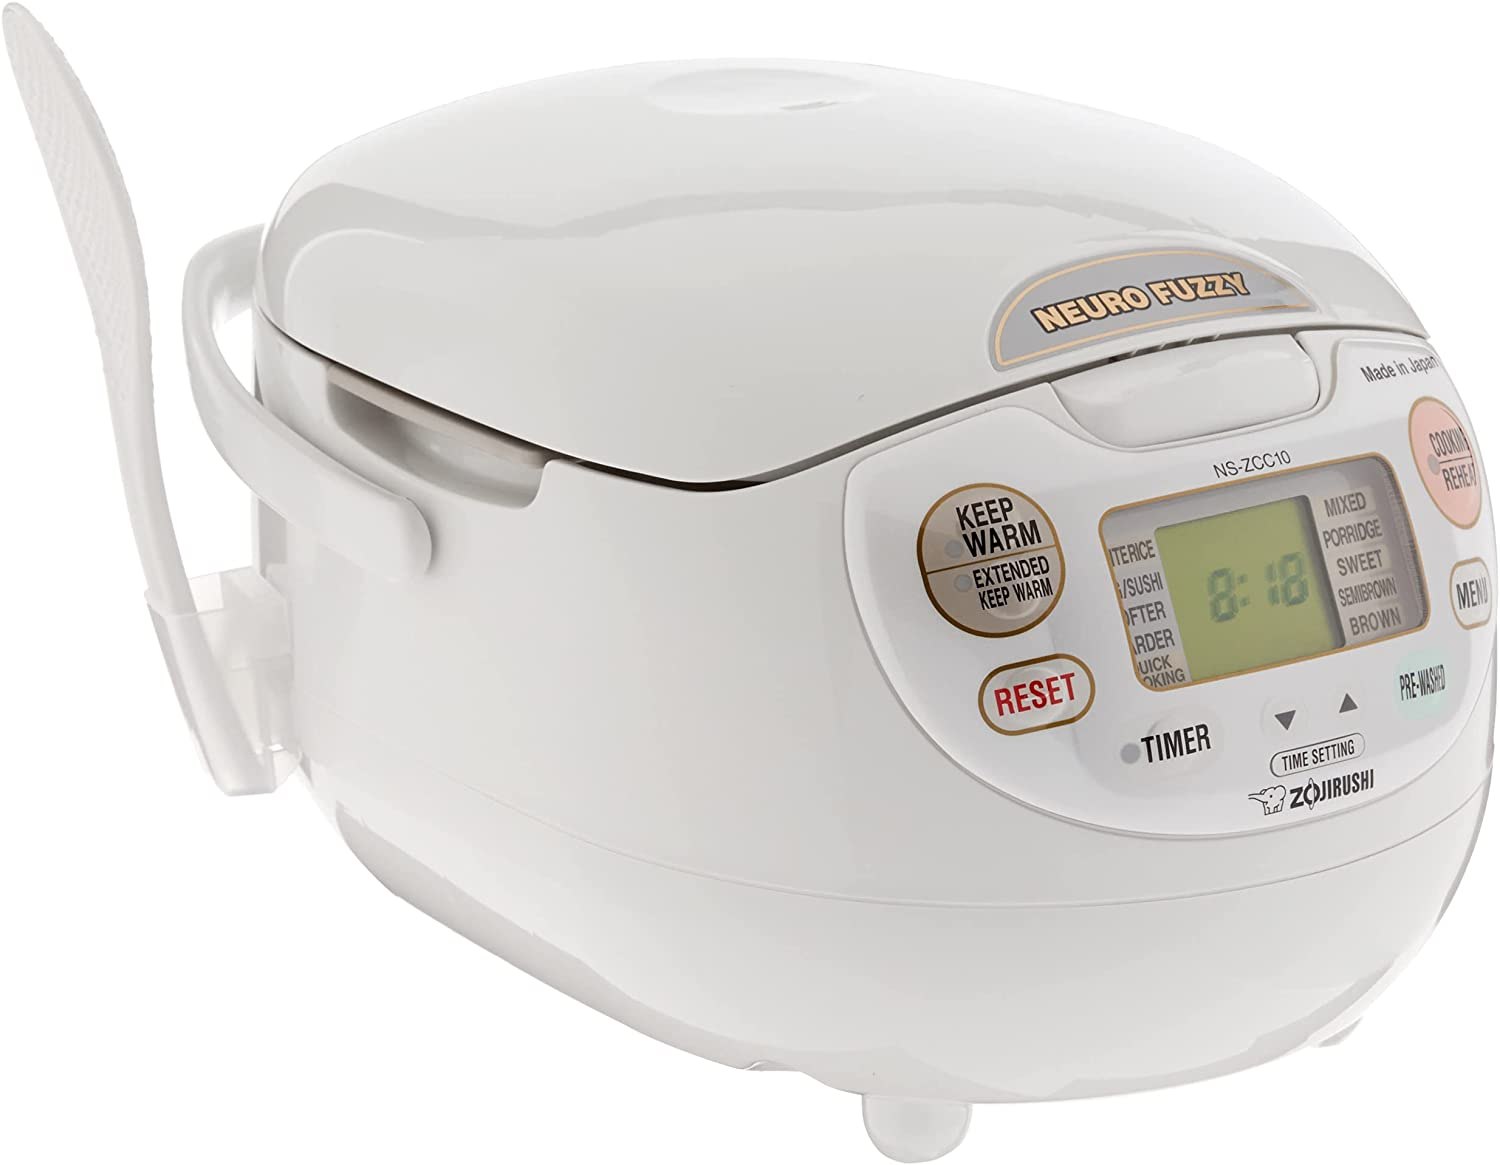 Great Choice Products Rice Cooker 3.5-Cup Uncooked(7-Cup Cooked) for 1-3 People Family, Multifunctional Cooking for White/Brown Rice, Oatmeal, Q